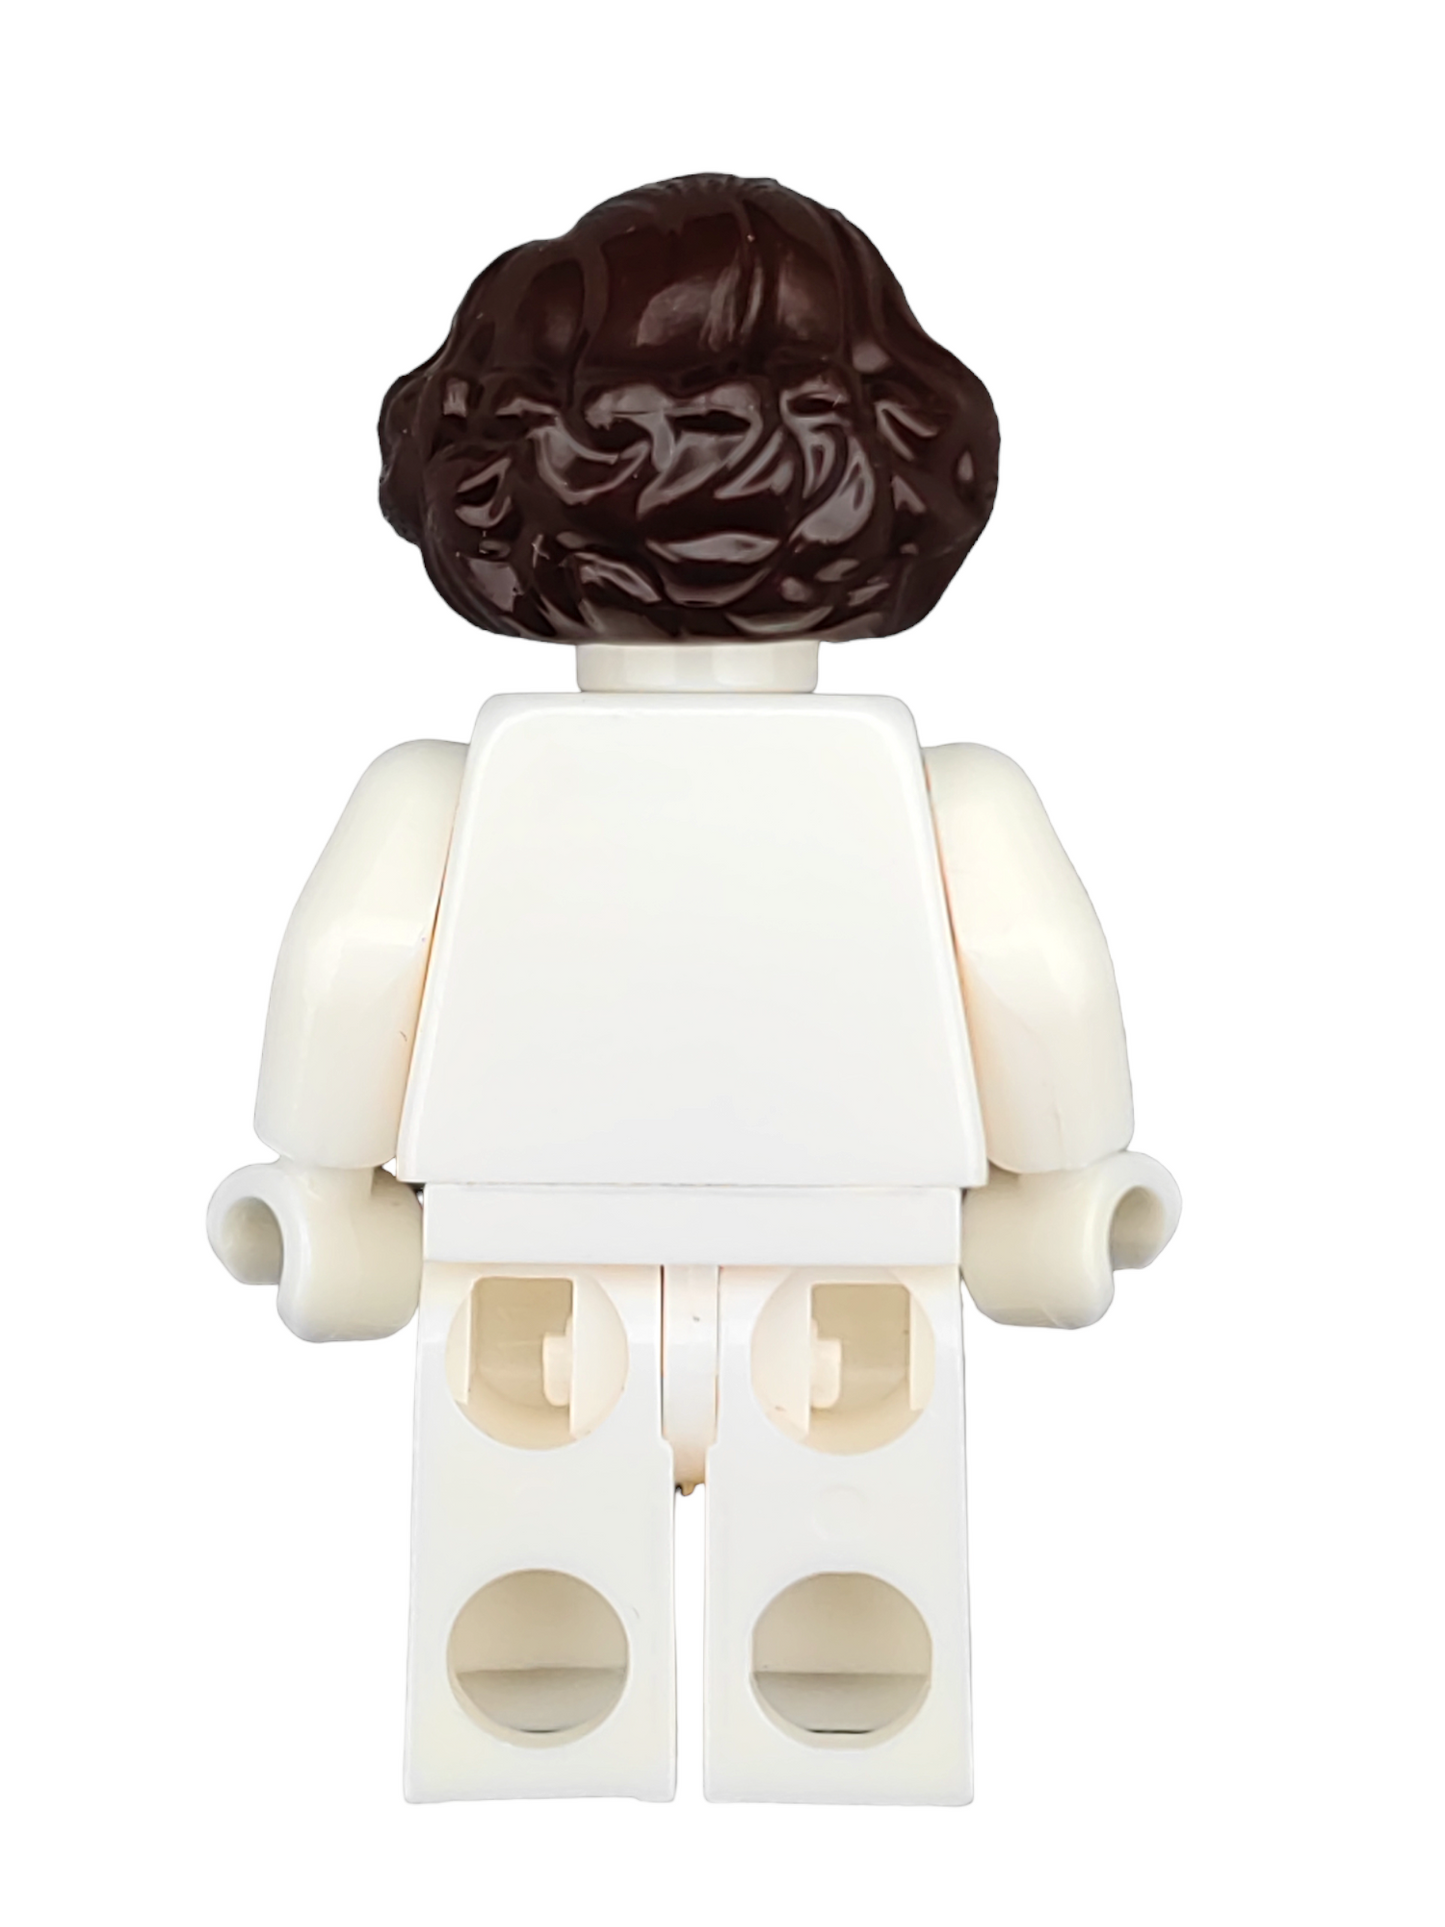 LEGO Wig, Dark Brown Hair Medium and Wavy with Side Parting - UB1270